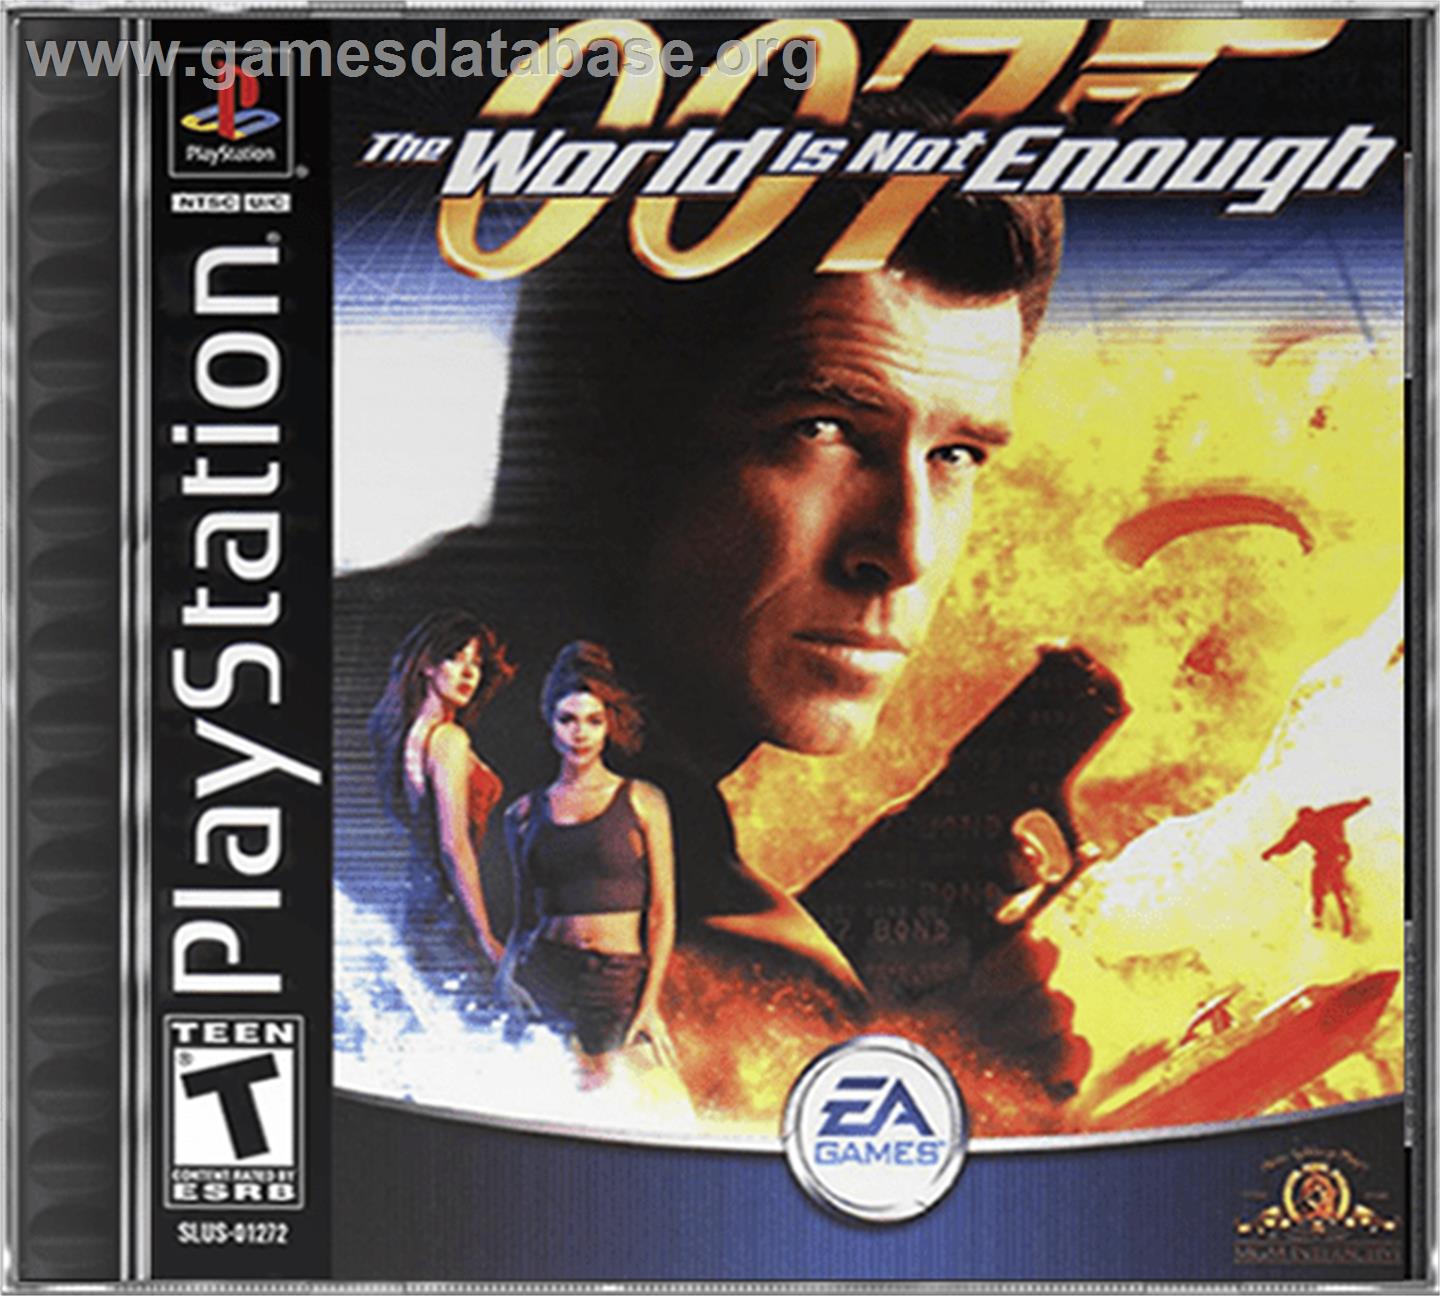 007: The World is Not Enough - Sony Playstation - Artwork - Box